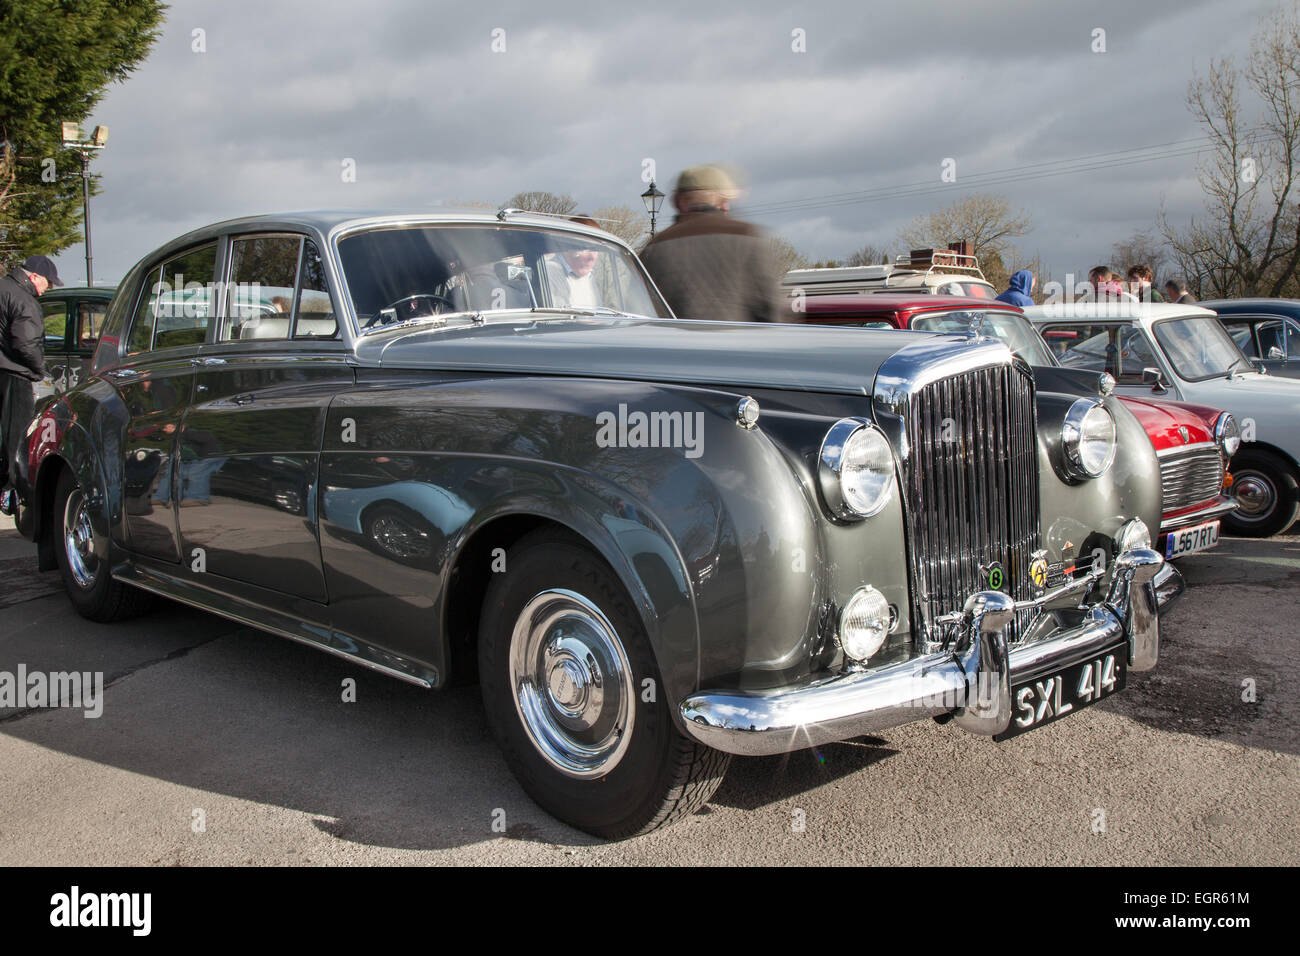 1956 SXL 414 Bentley at the Inaugural Car Club Meet in Wrightington held in the car park of the Corner House Hotel. Stock Photo